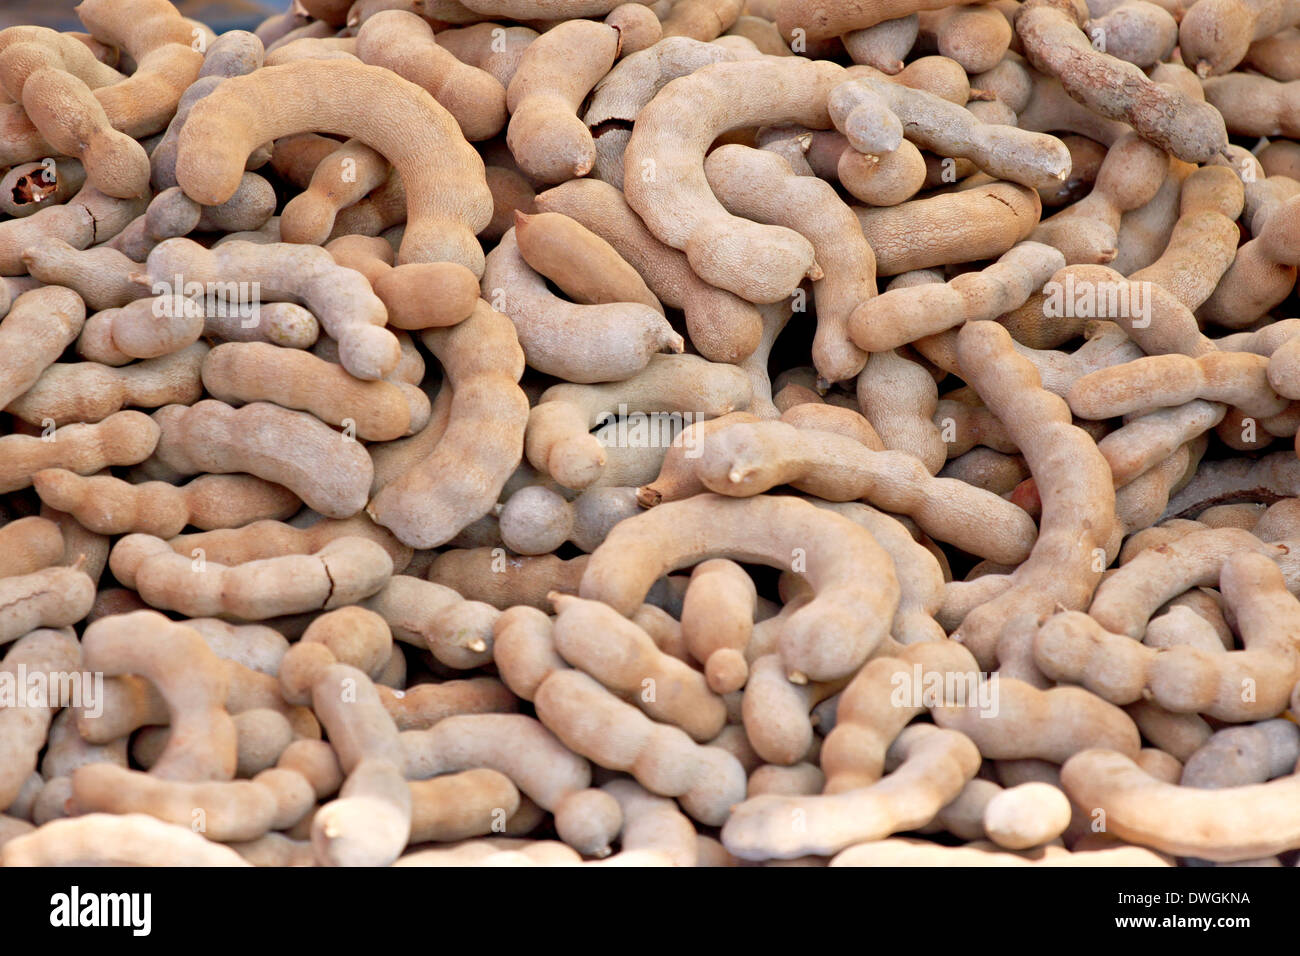 The Tamarind of stacked in abundance. Stock Photo